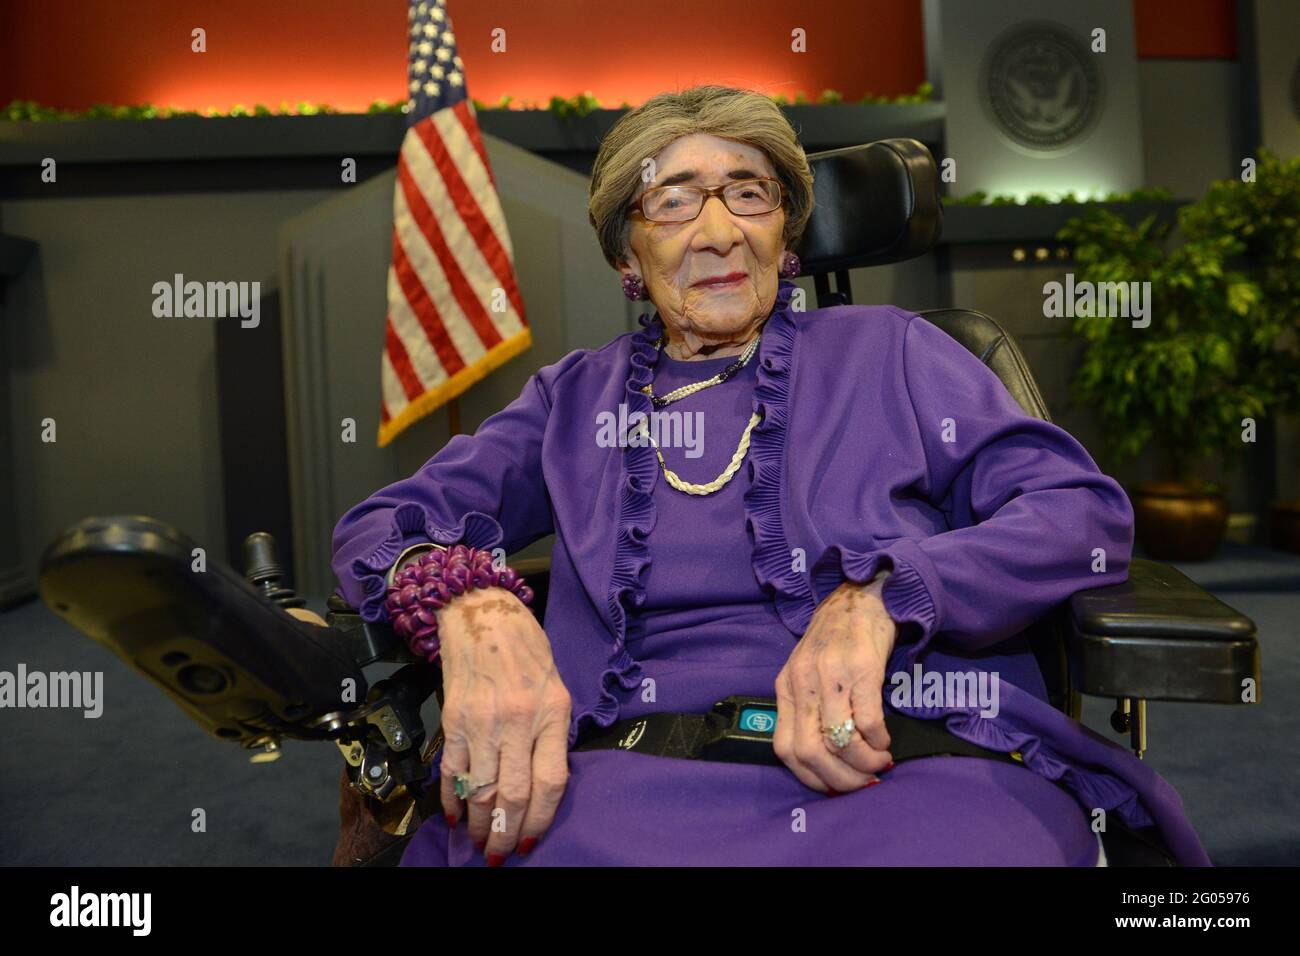 Reportage:   World War II Army veteran 106-year-old Alyce Dixon is seen at the Pentagon, after she was honored at a women's history month event with a Department of the Army lifetime achievement award and a certificate of appreciation, March 31, 2014. Dixon, who was a member of the Women's Army Corps, served in Europe during World War II as a member of the 6888th Central Postal Directory Battalion. The 6888th was the only unit of African-American women in the WAC to serve overseas in England and France during World War II. Stock Photo